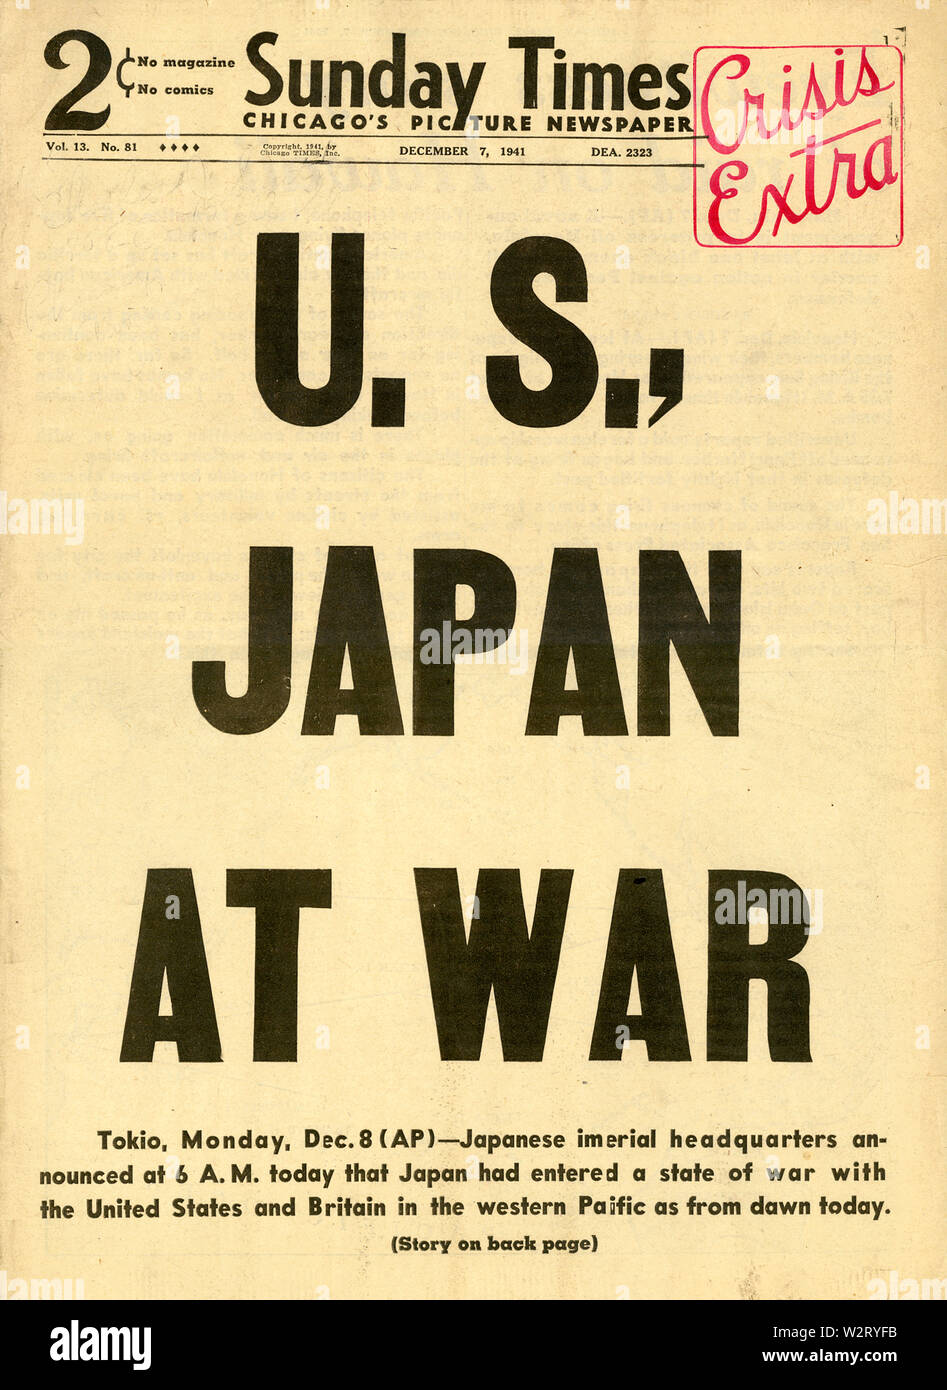 [ 1940s Japan - Special Edition Newspaper: US Japan at War ] —   A special newspaper edition for December 7, 1941 (Showa 16) of the Sunday Times announcing the state of war between Japan and  the US. The headline shouts 'U.S., JAPAN AT WAR.' On the top right it says 'Crisis Extra.'   The Chicago based Sunday Times was launched in 1844 as the  Chicago Evening Journal and is now known as the Chicago Sun-Times.  20th century vintage newspaper. Stock Photo